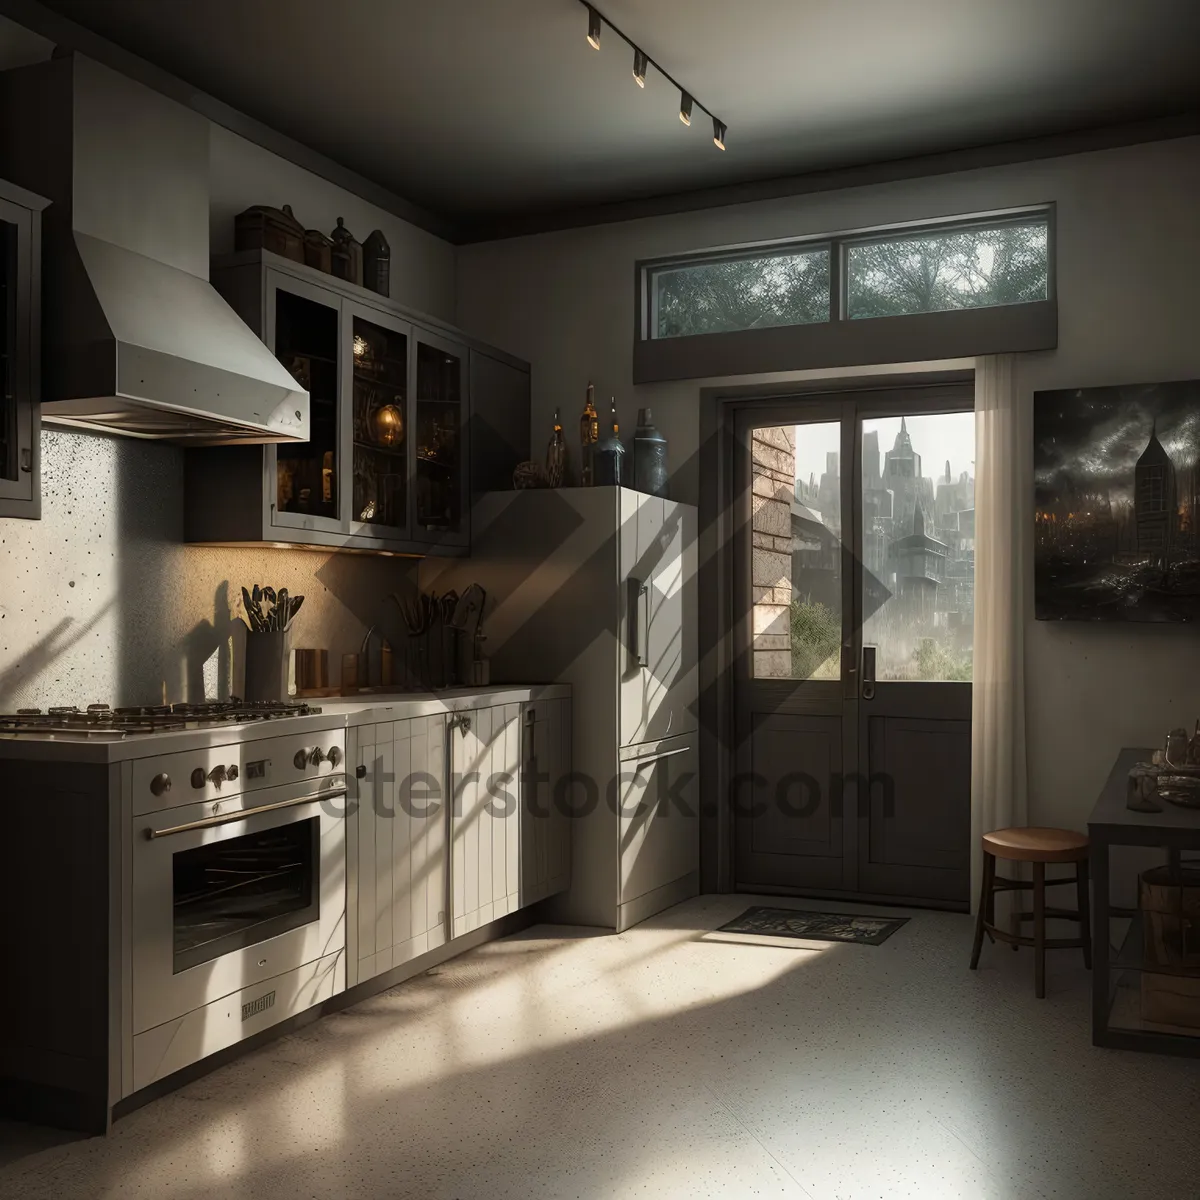 Picture of Modern Kitchen Interior with Wood Floor and Luxury Furniture